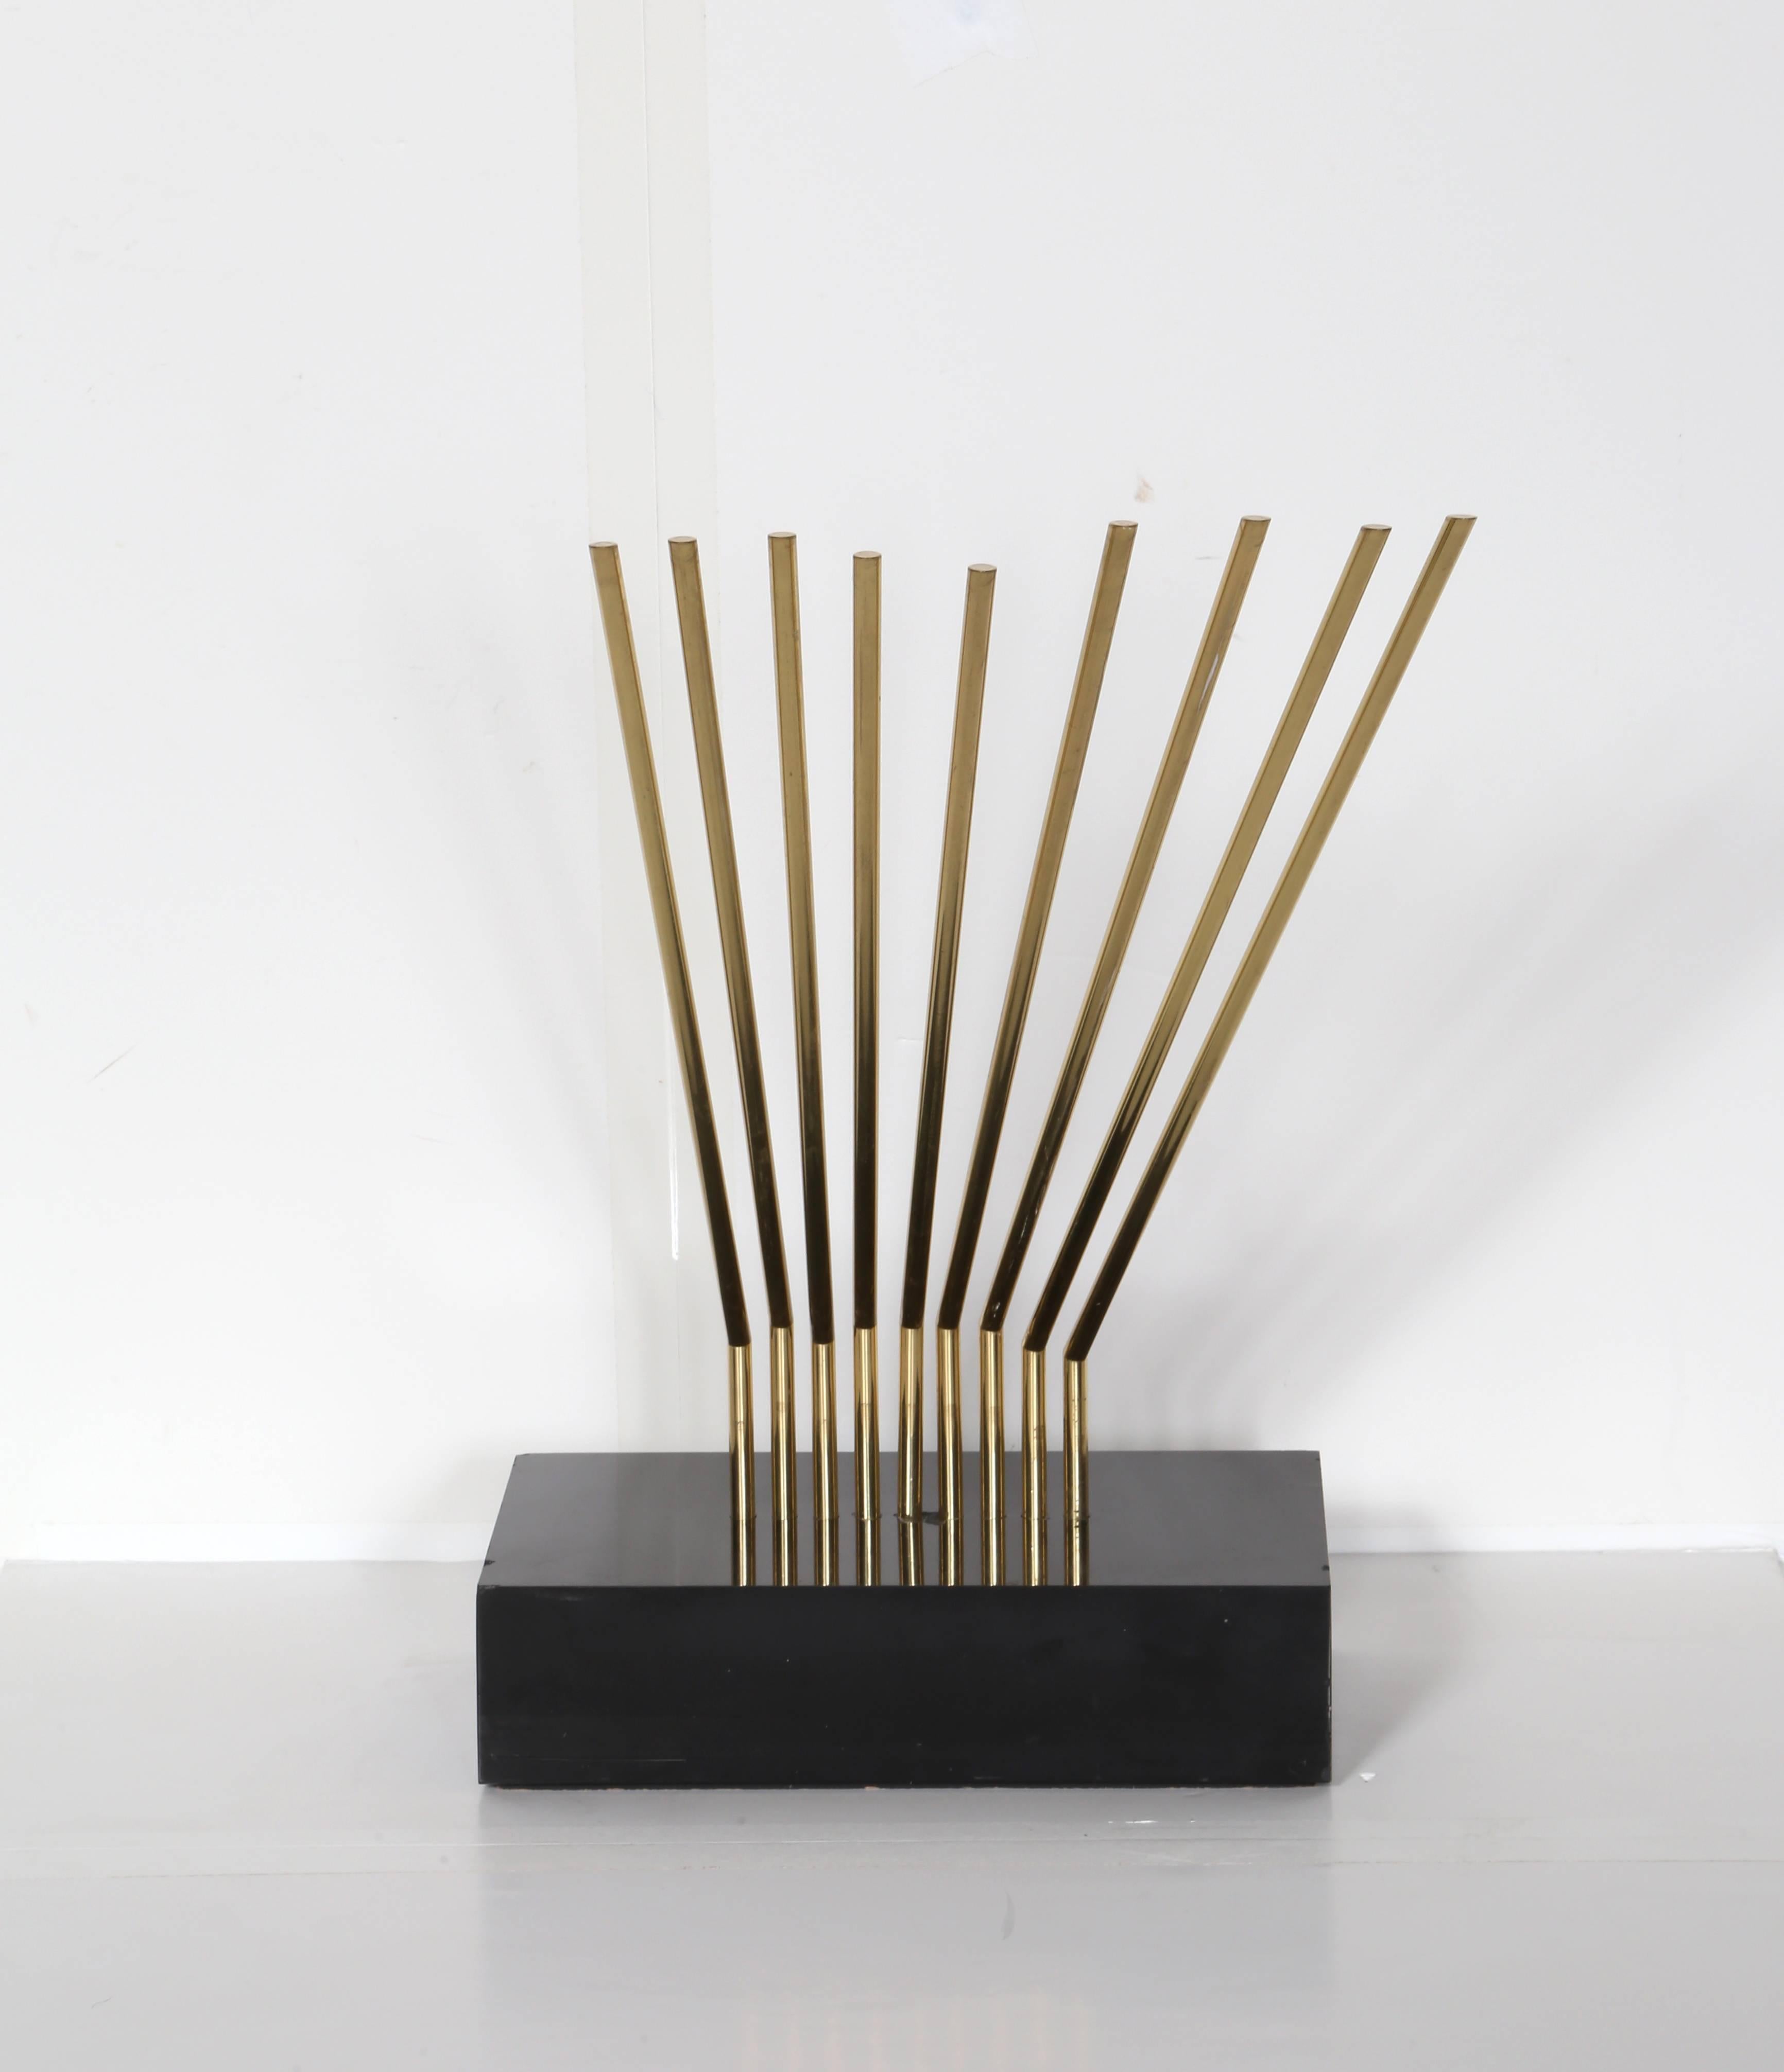 In all Directions (Toutes Directions) - Gray Abstract Sculpture by Yaacov Agam